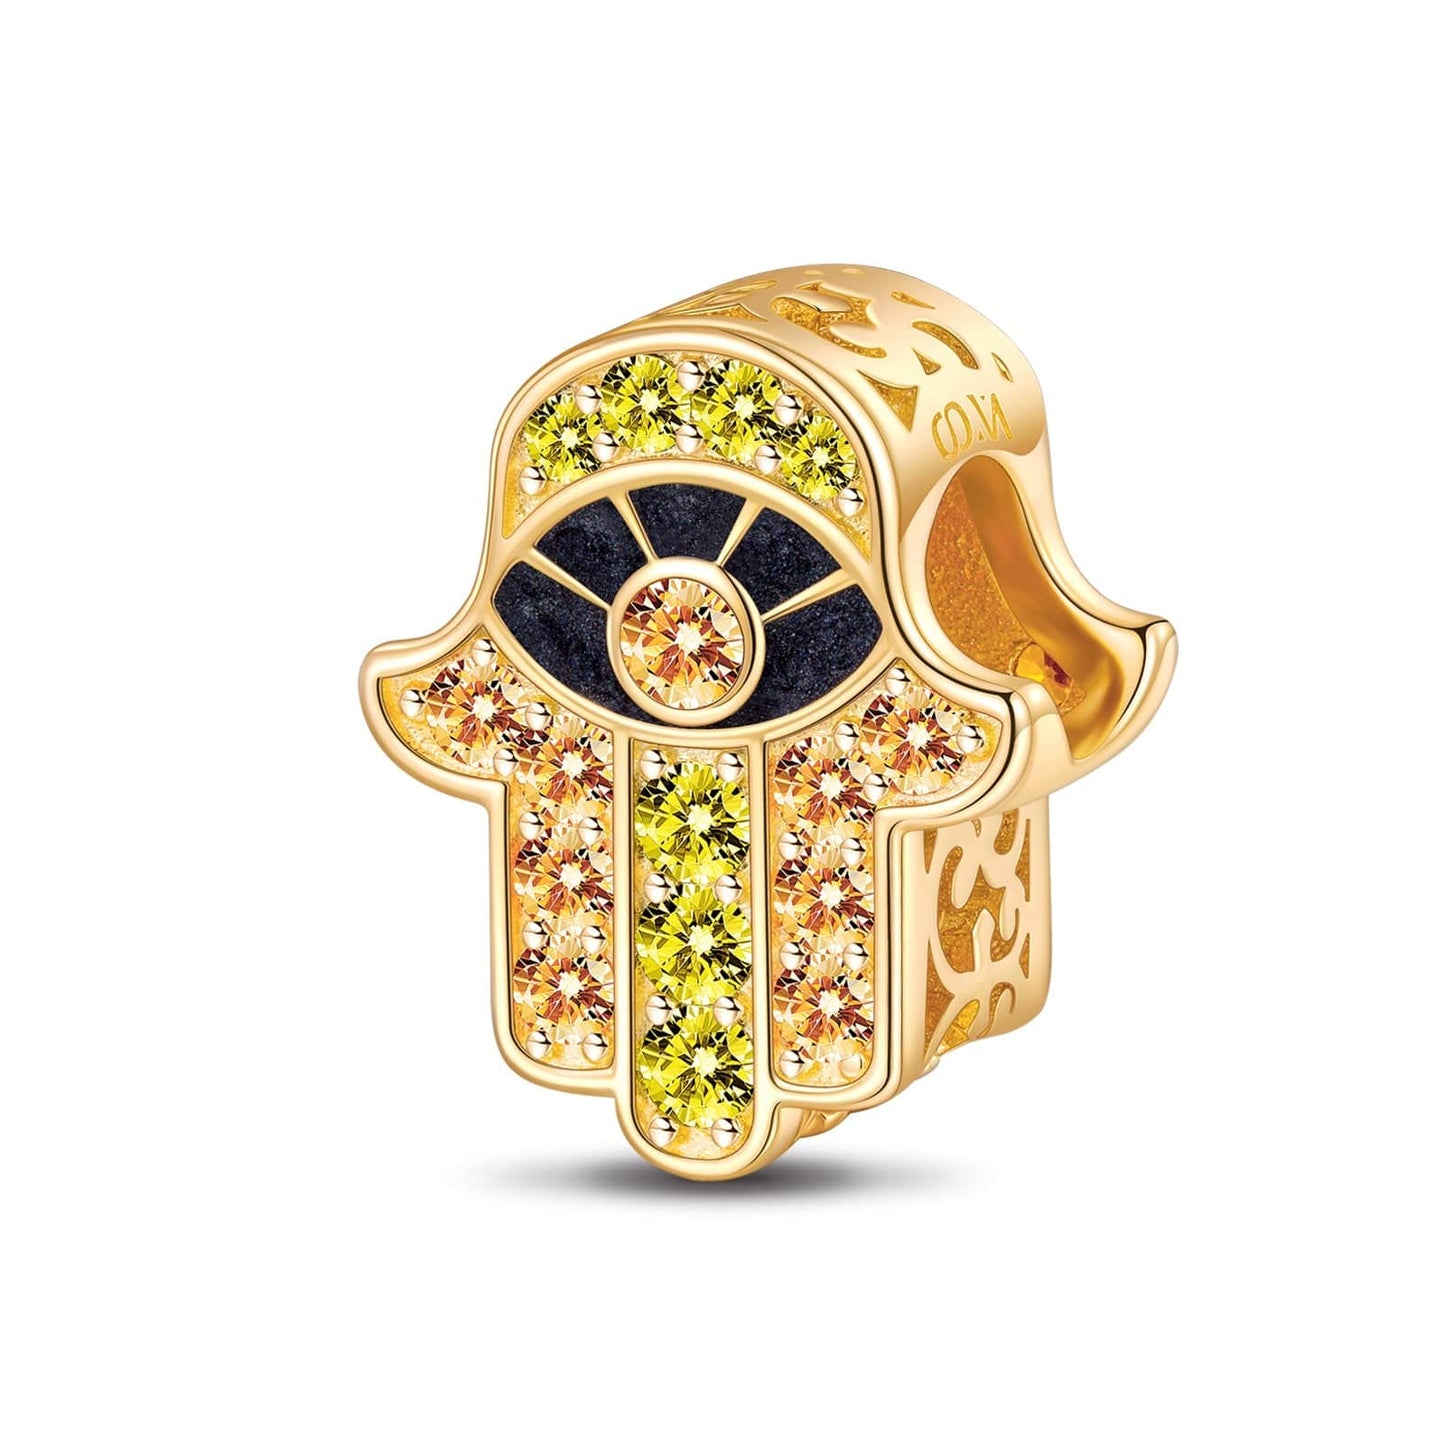 Hamasa Hand Tarnish-resistant Silver Charms With Enamel In 14K Gold Plated